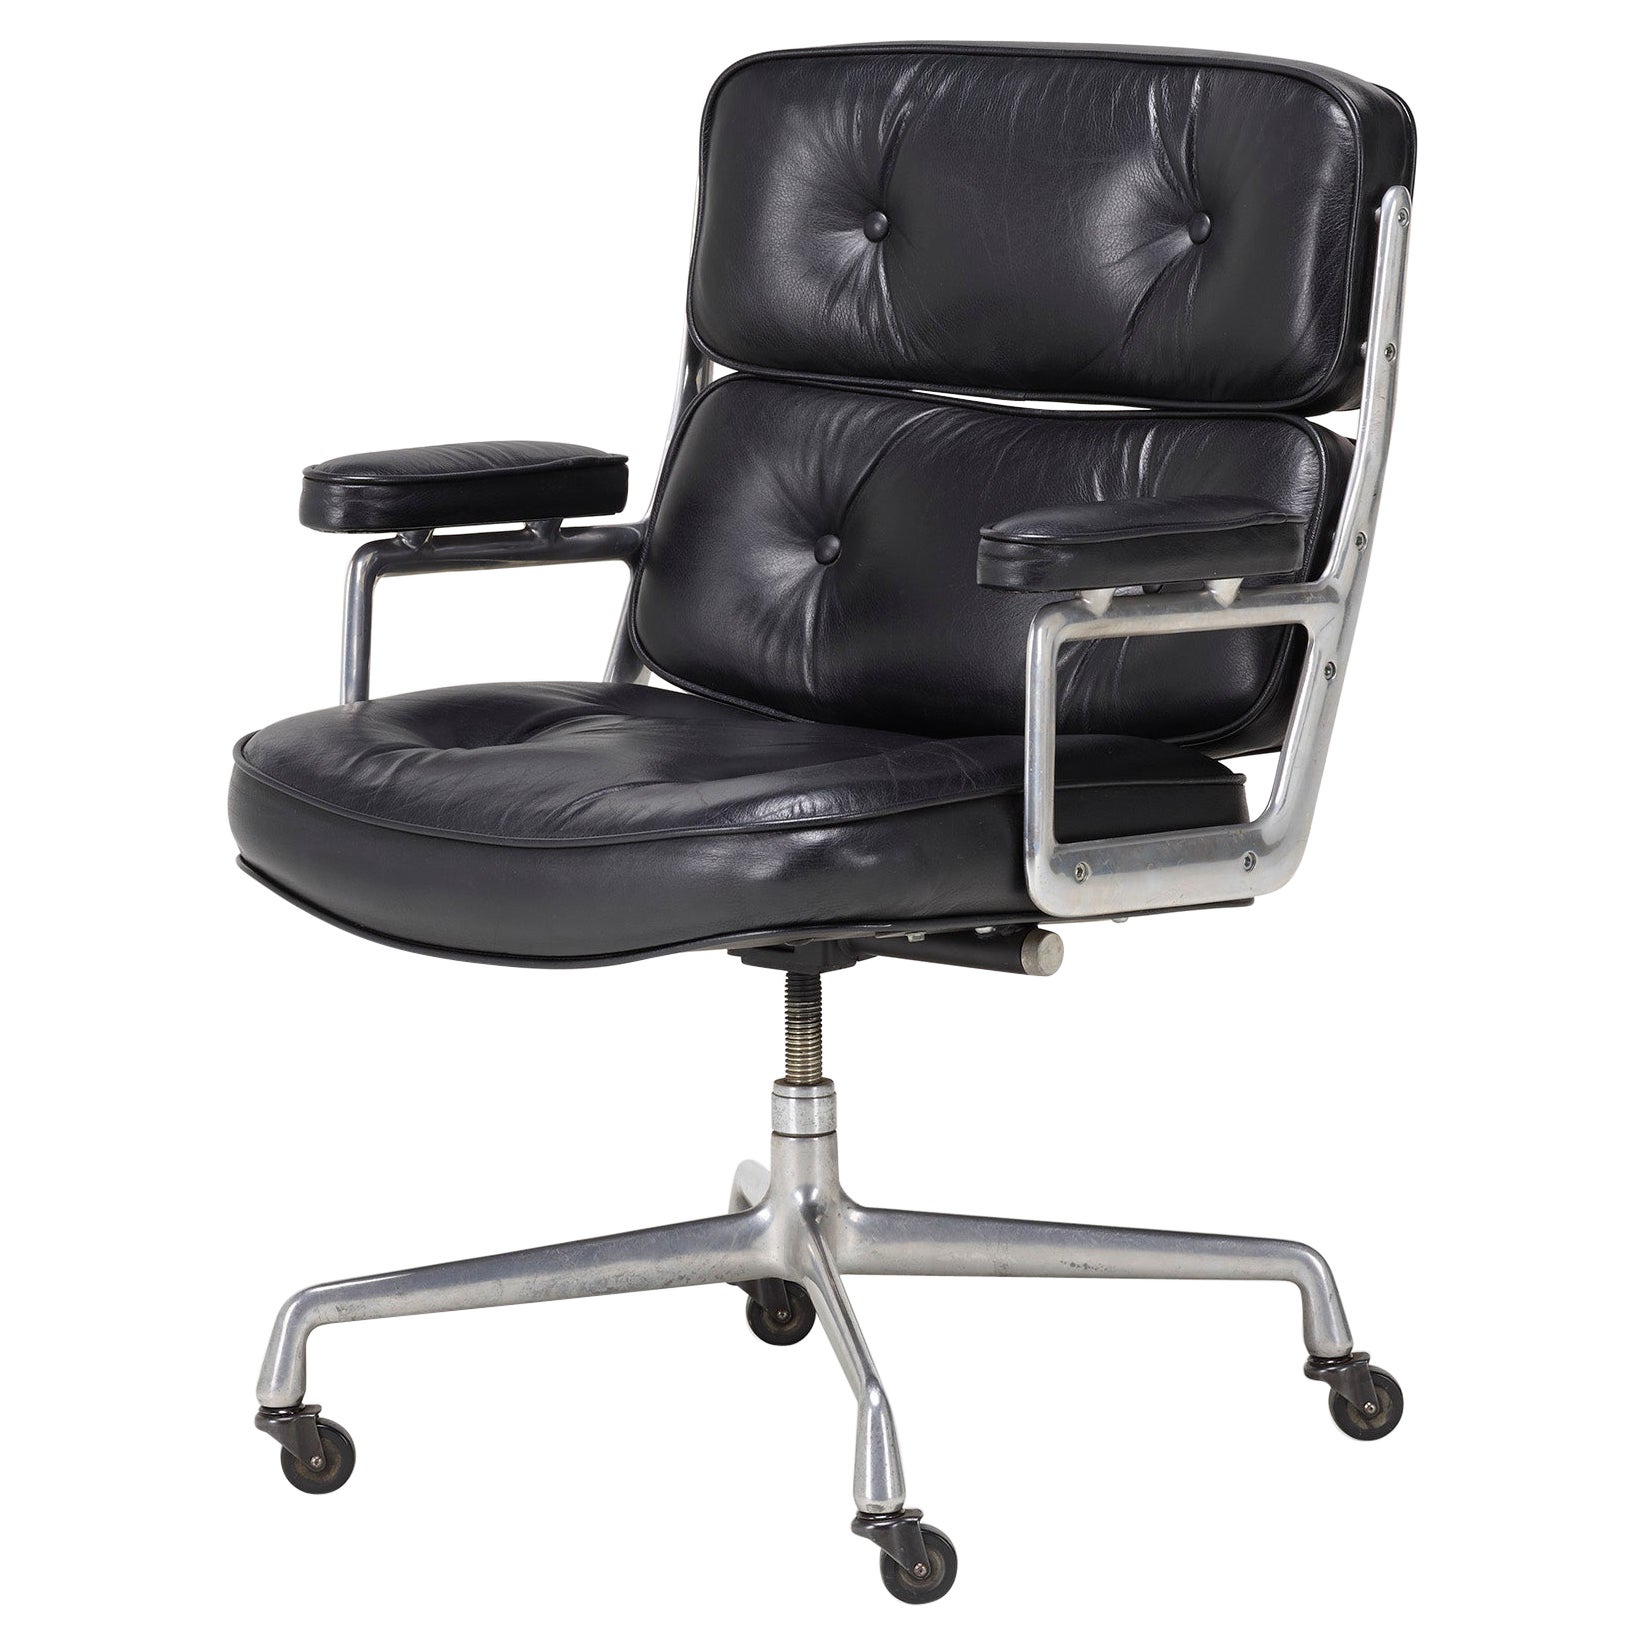 Charles and Ray Eames Time Life Executive Chair